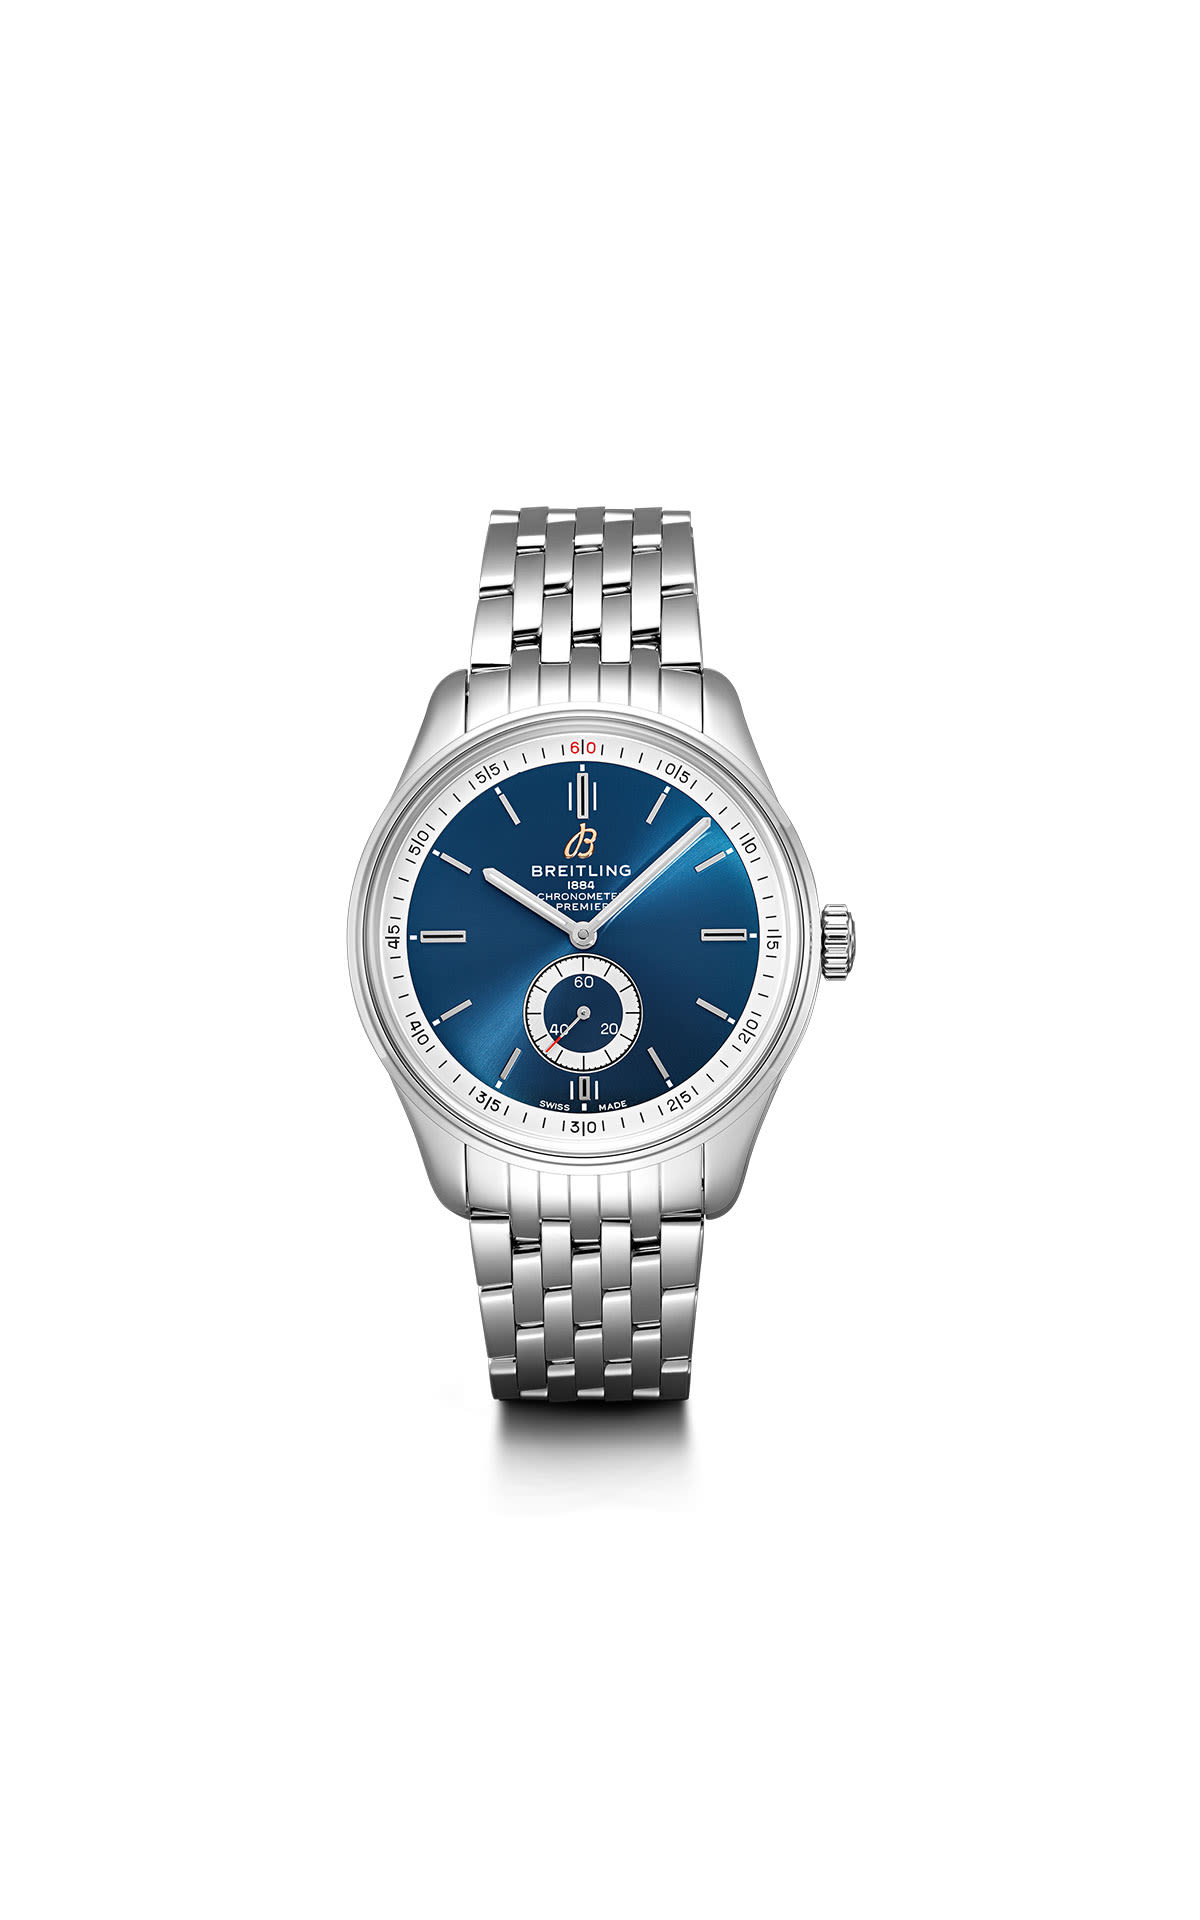 Breitling Premier Automatic 40 from Bicester Village